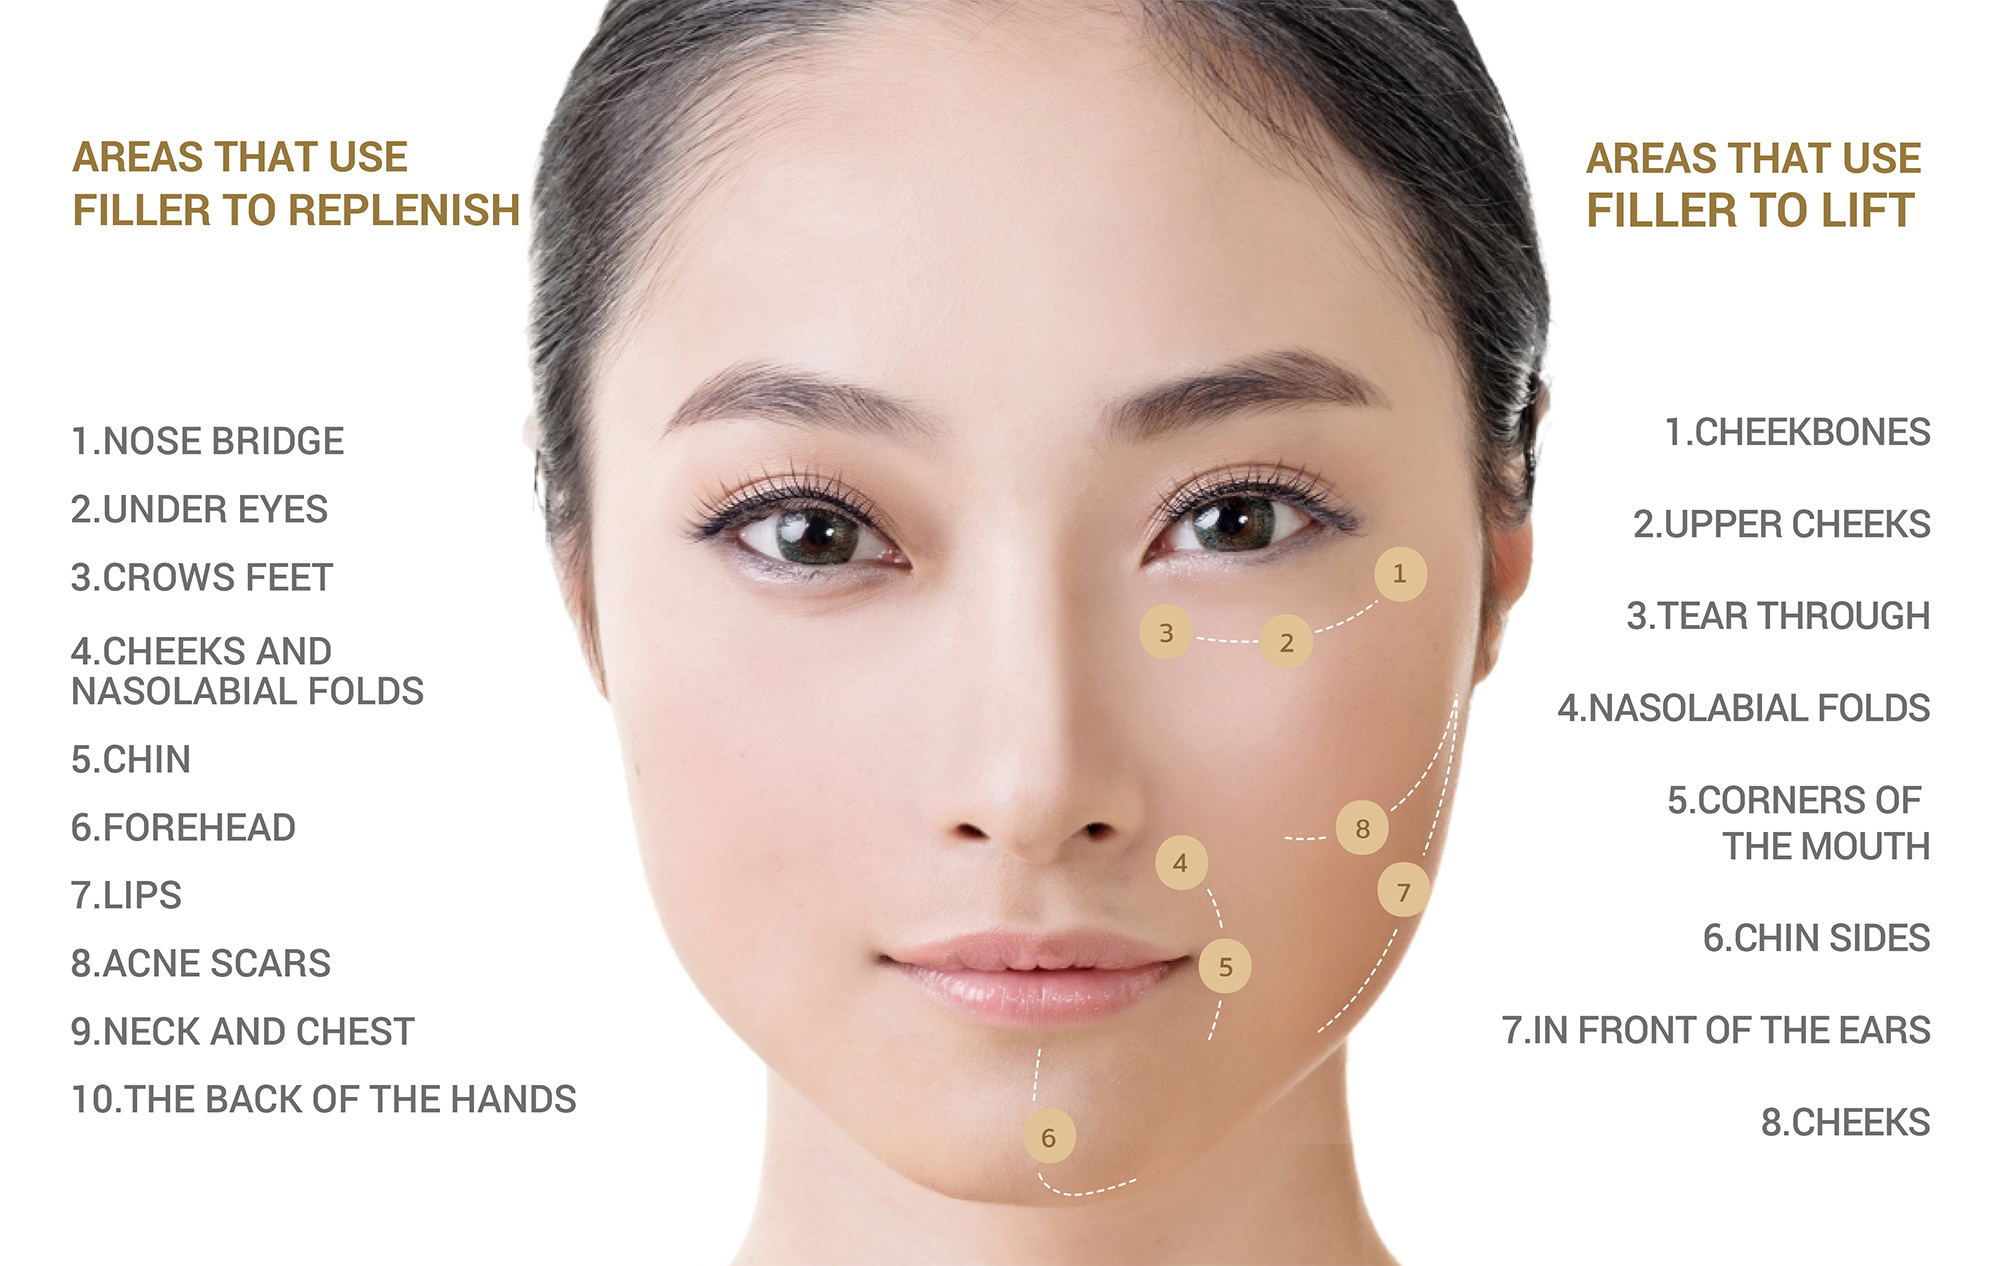 Areas that use filler